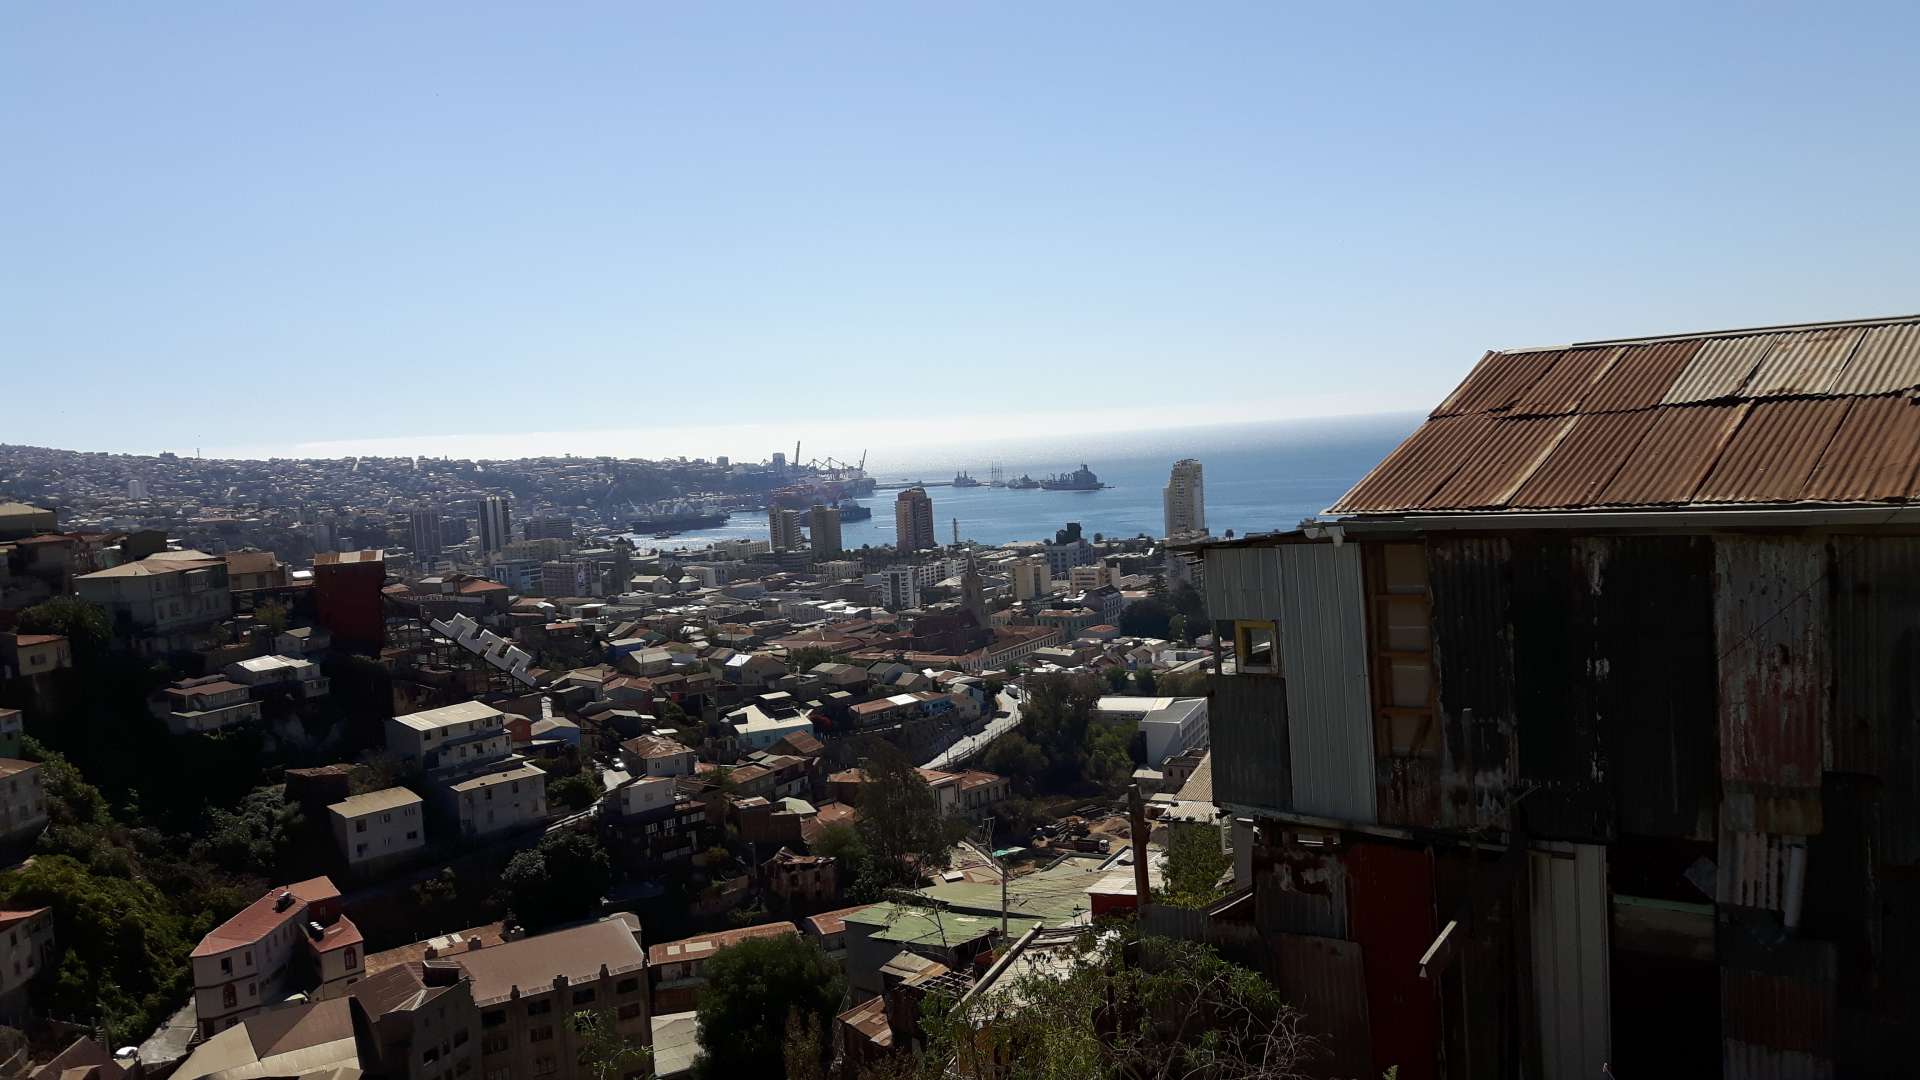 Wooden house next to wooden house. The Chilean government provides sports fields so that Valparaiso belongs to everyone